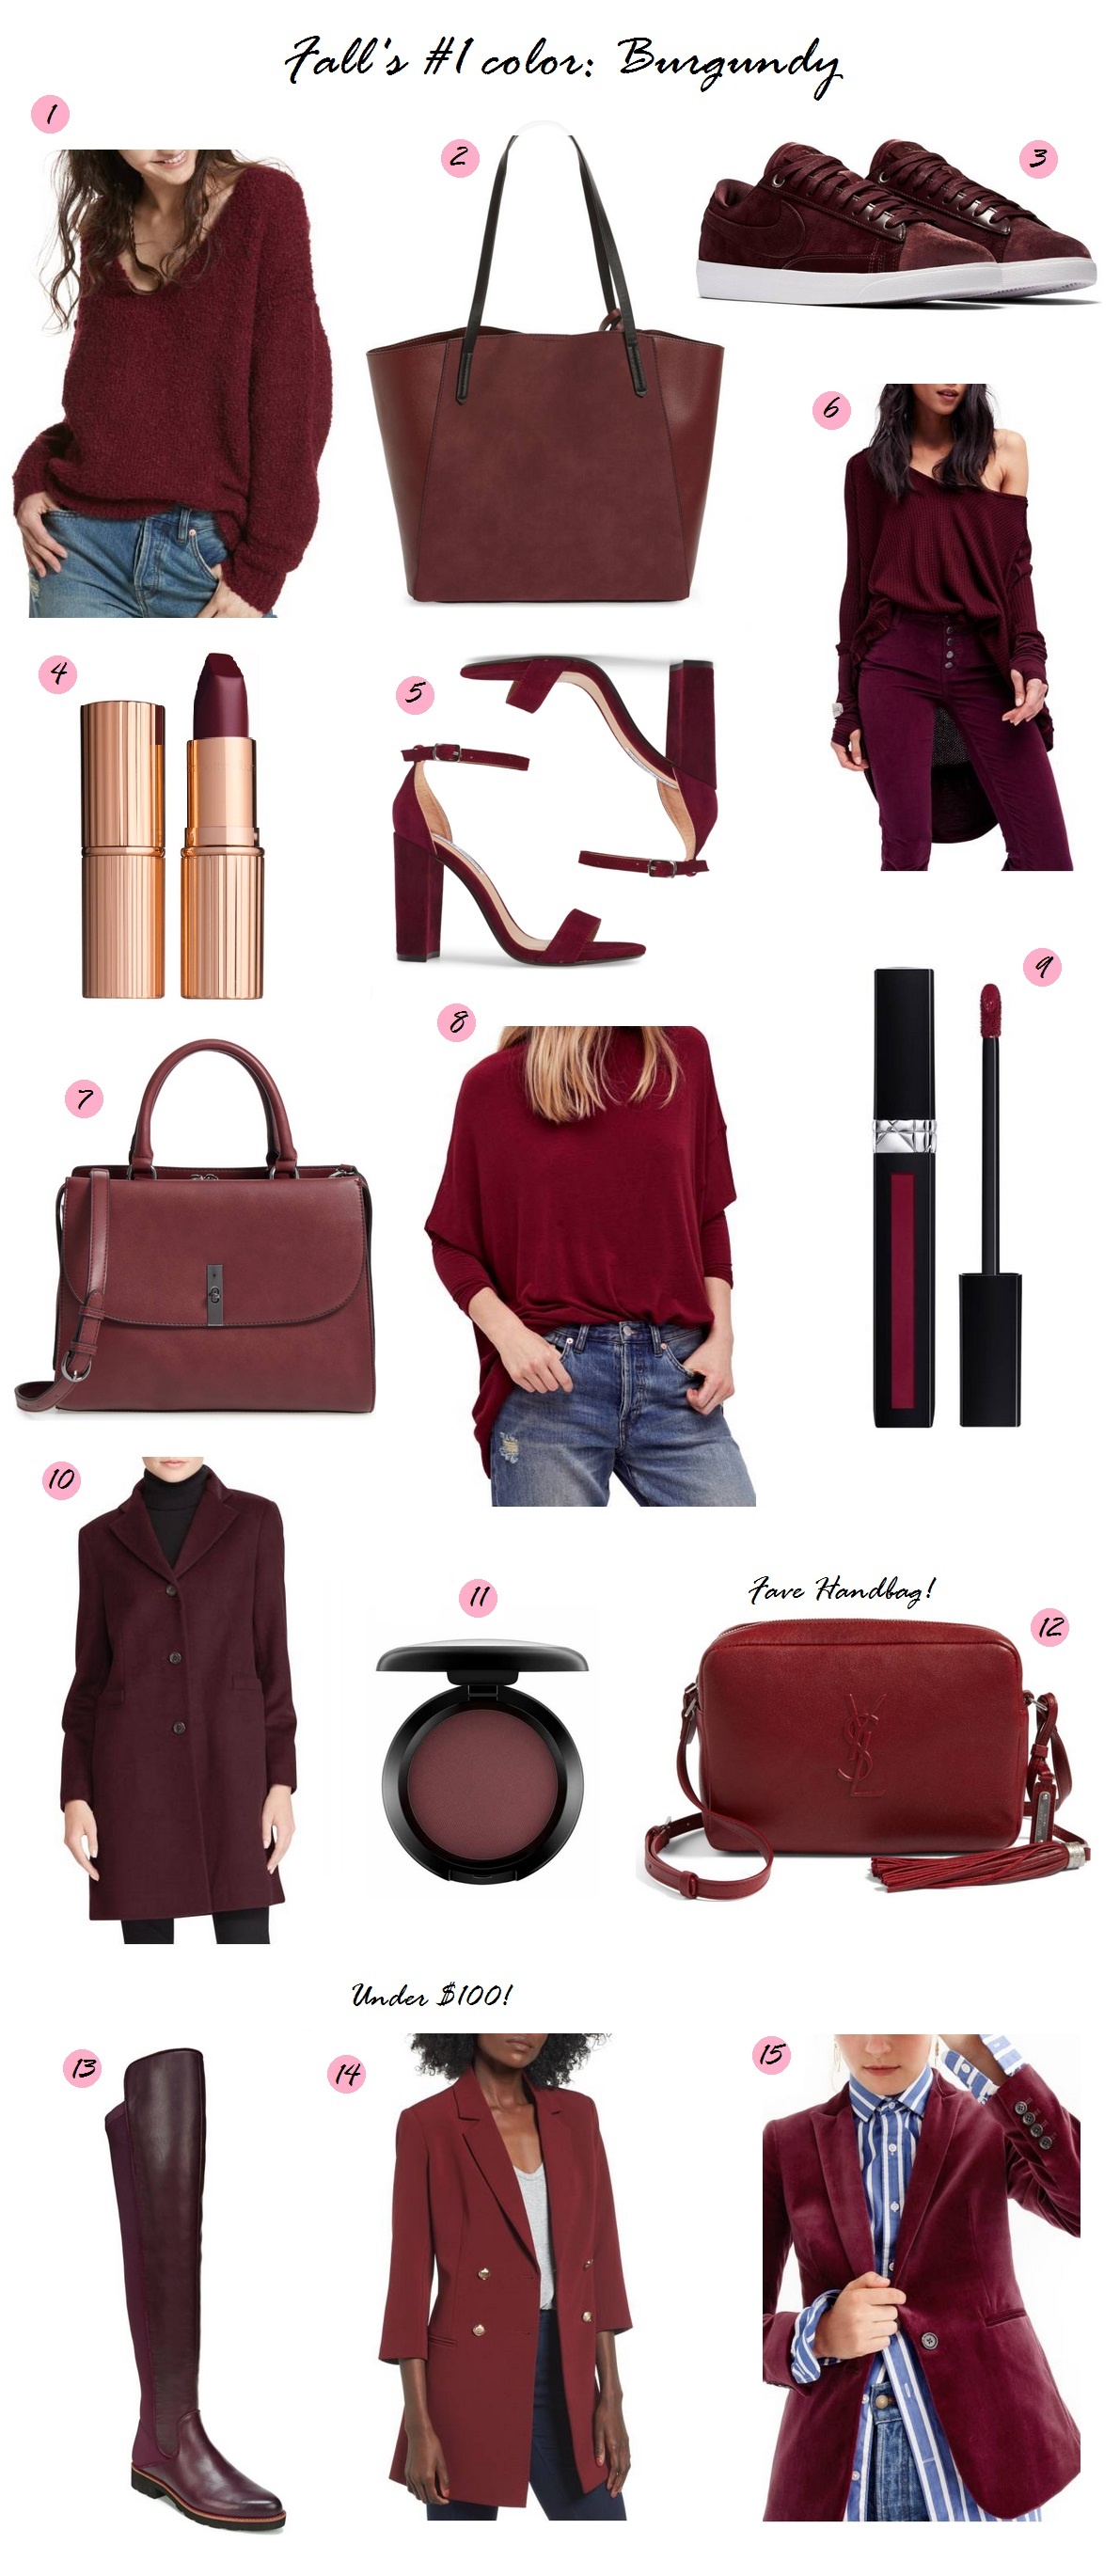 burgundy-color-fall-picks-2017-what-would-v-wear